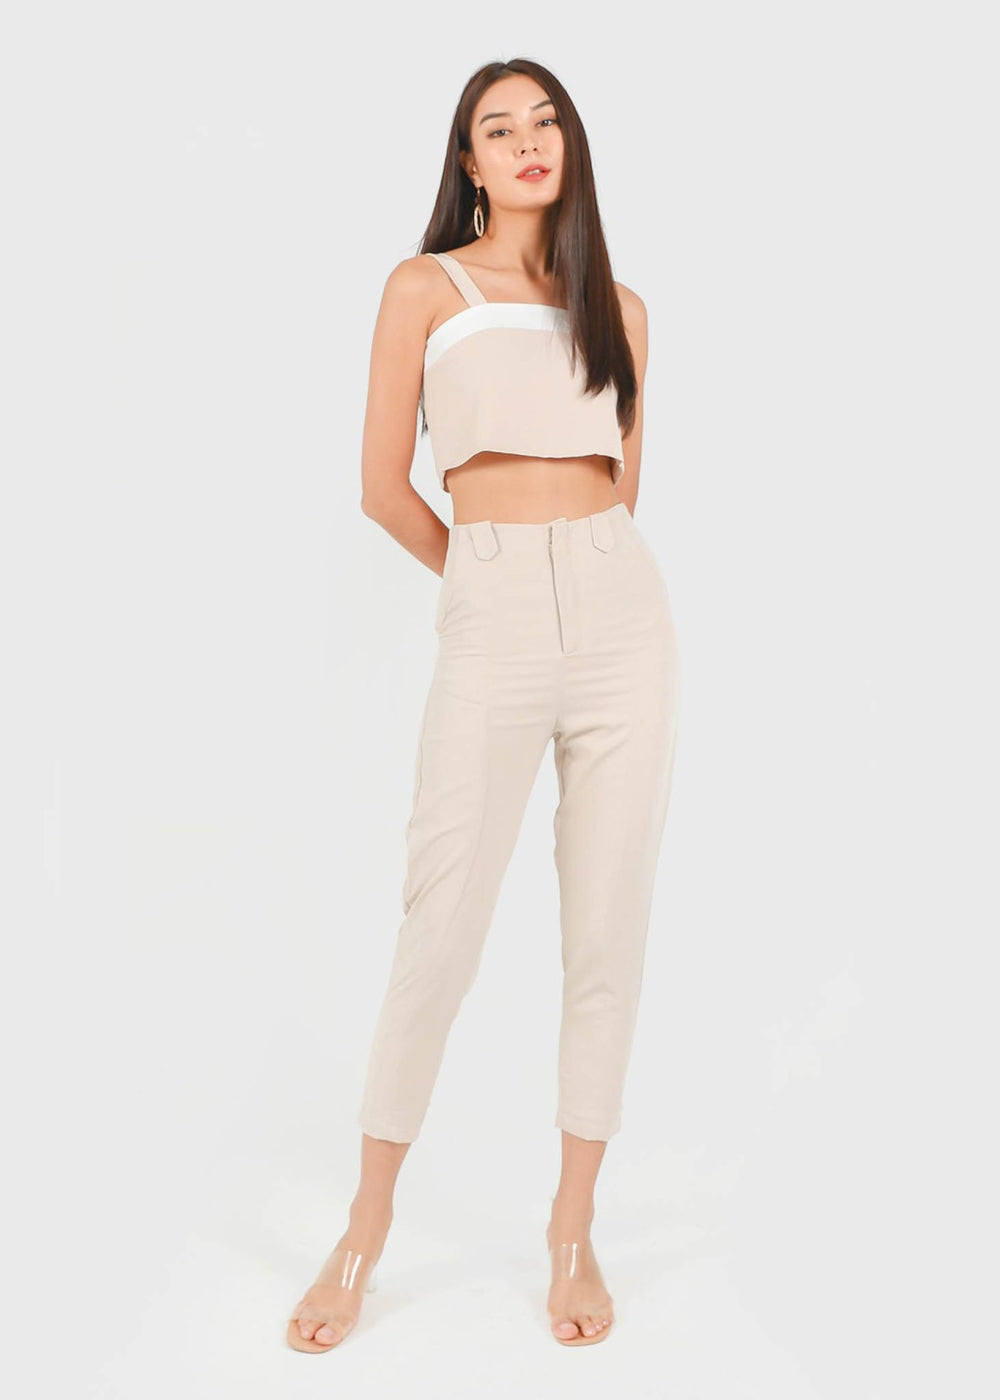 Shelia Buckle Tapered Panel Pants in Sand #6stylexclusive